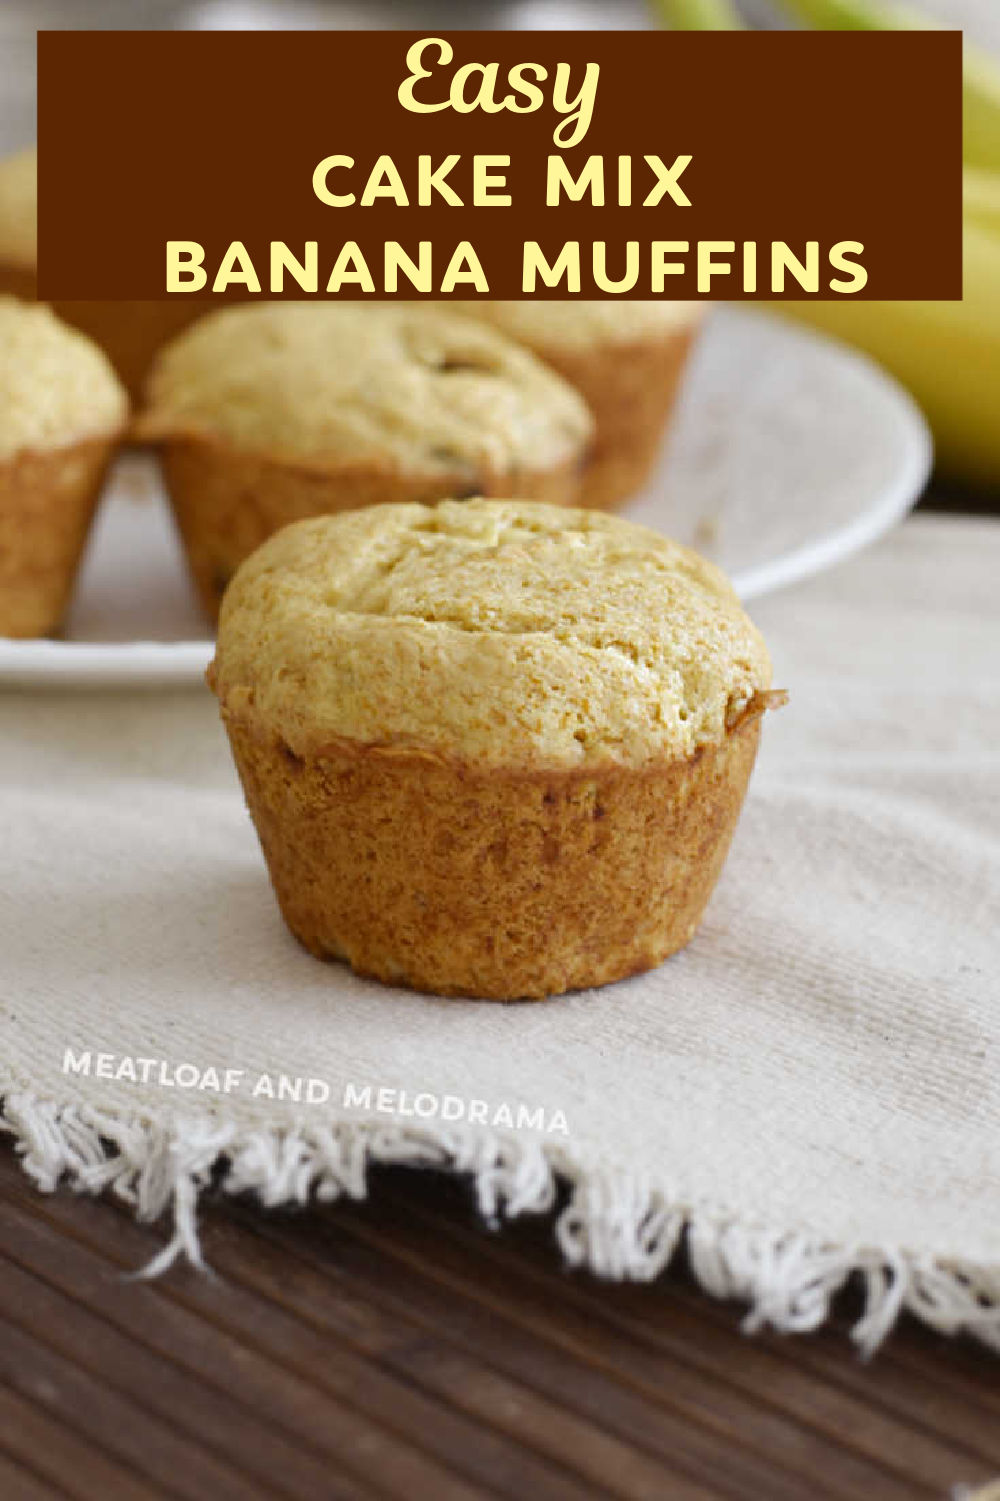 Easy Two Ingredient Banana Muffins with cake mix and ripe bananas take minutes to make and are perfect a quick breakfast or snack! The easiest banana muffin recipe ever! via @meamel